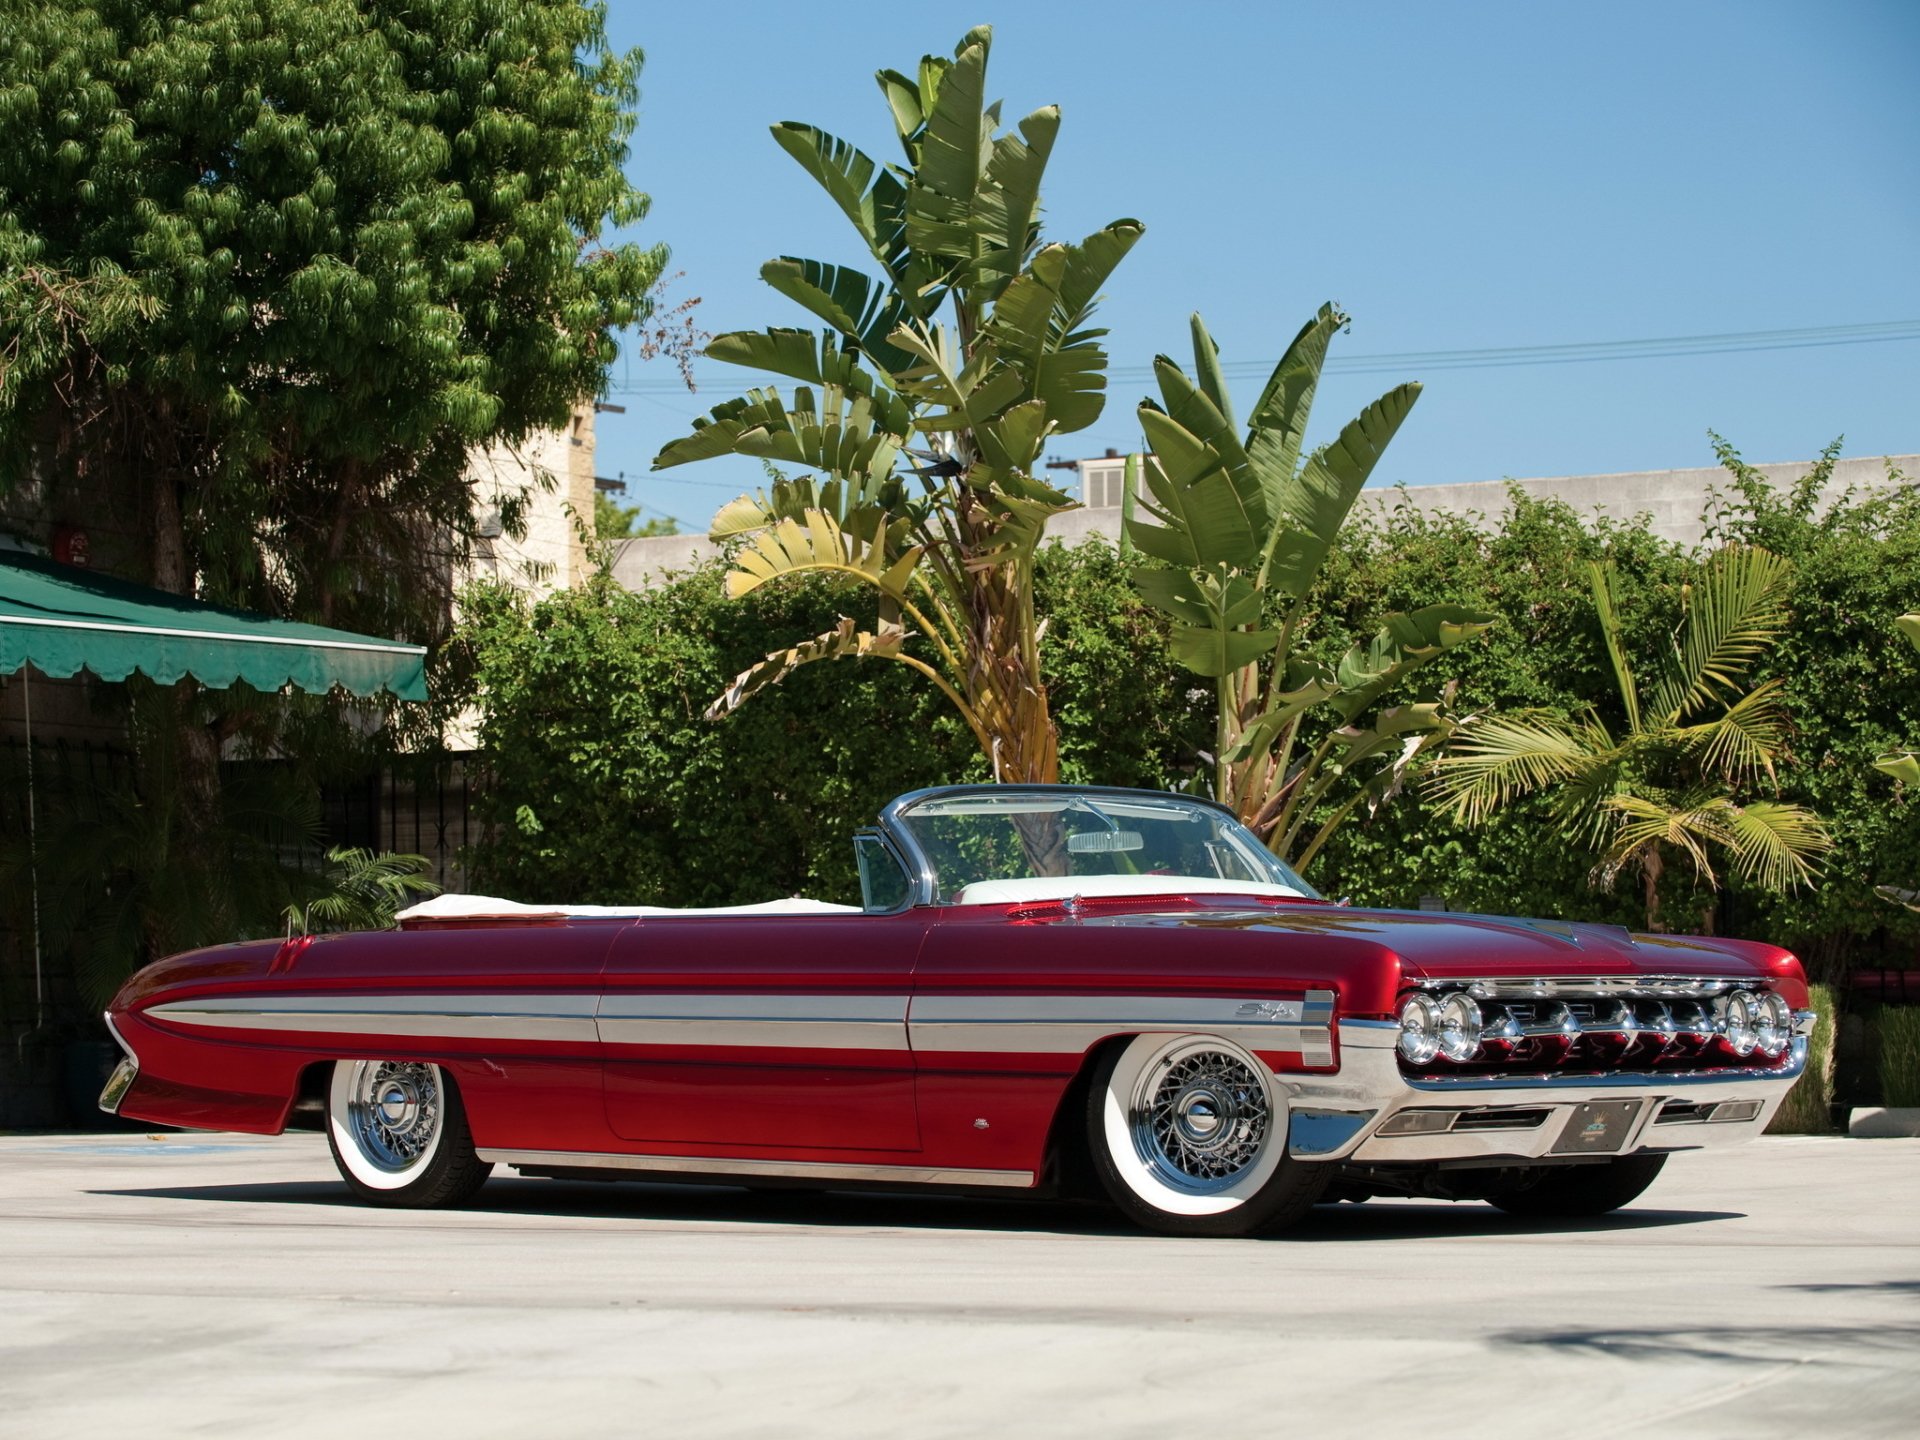 Oldsmobile Starfire Convertible Full HD Wallpaper And